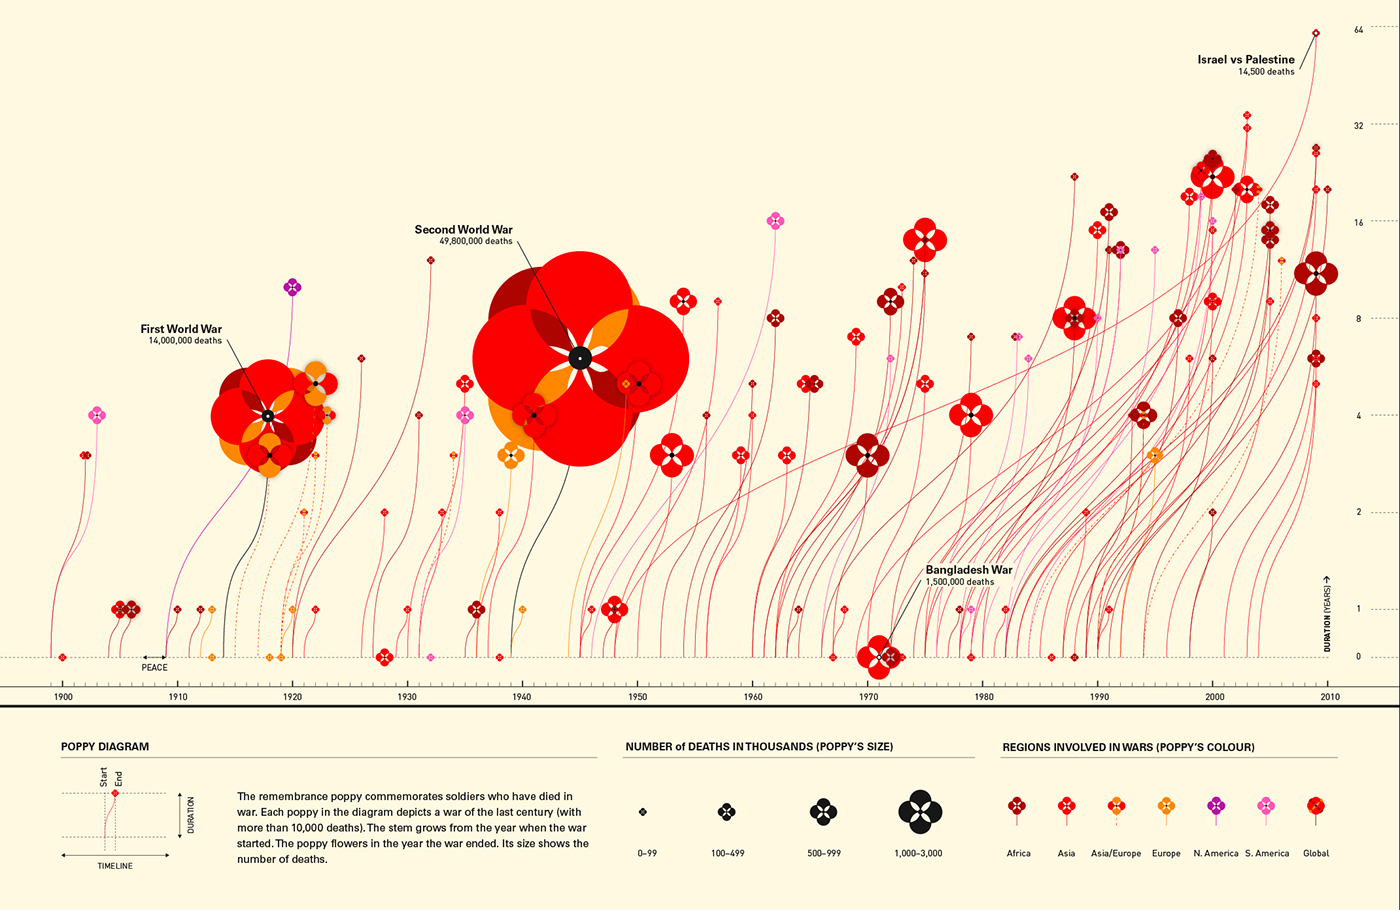 Data visualisation portraying the casualties and locations of major war events in the twentieth century.